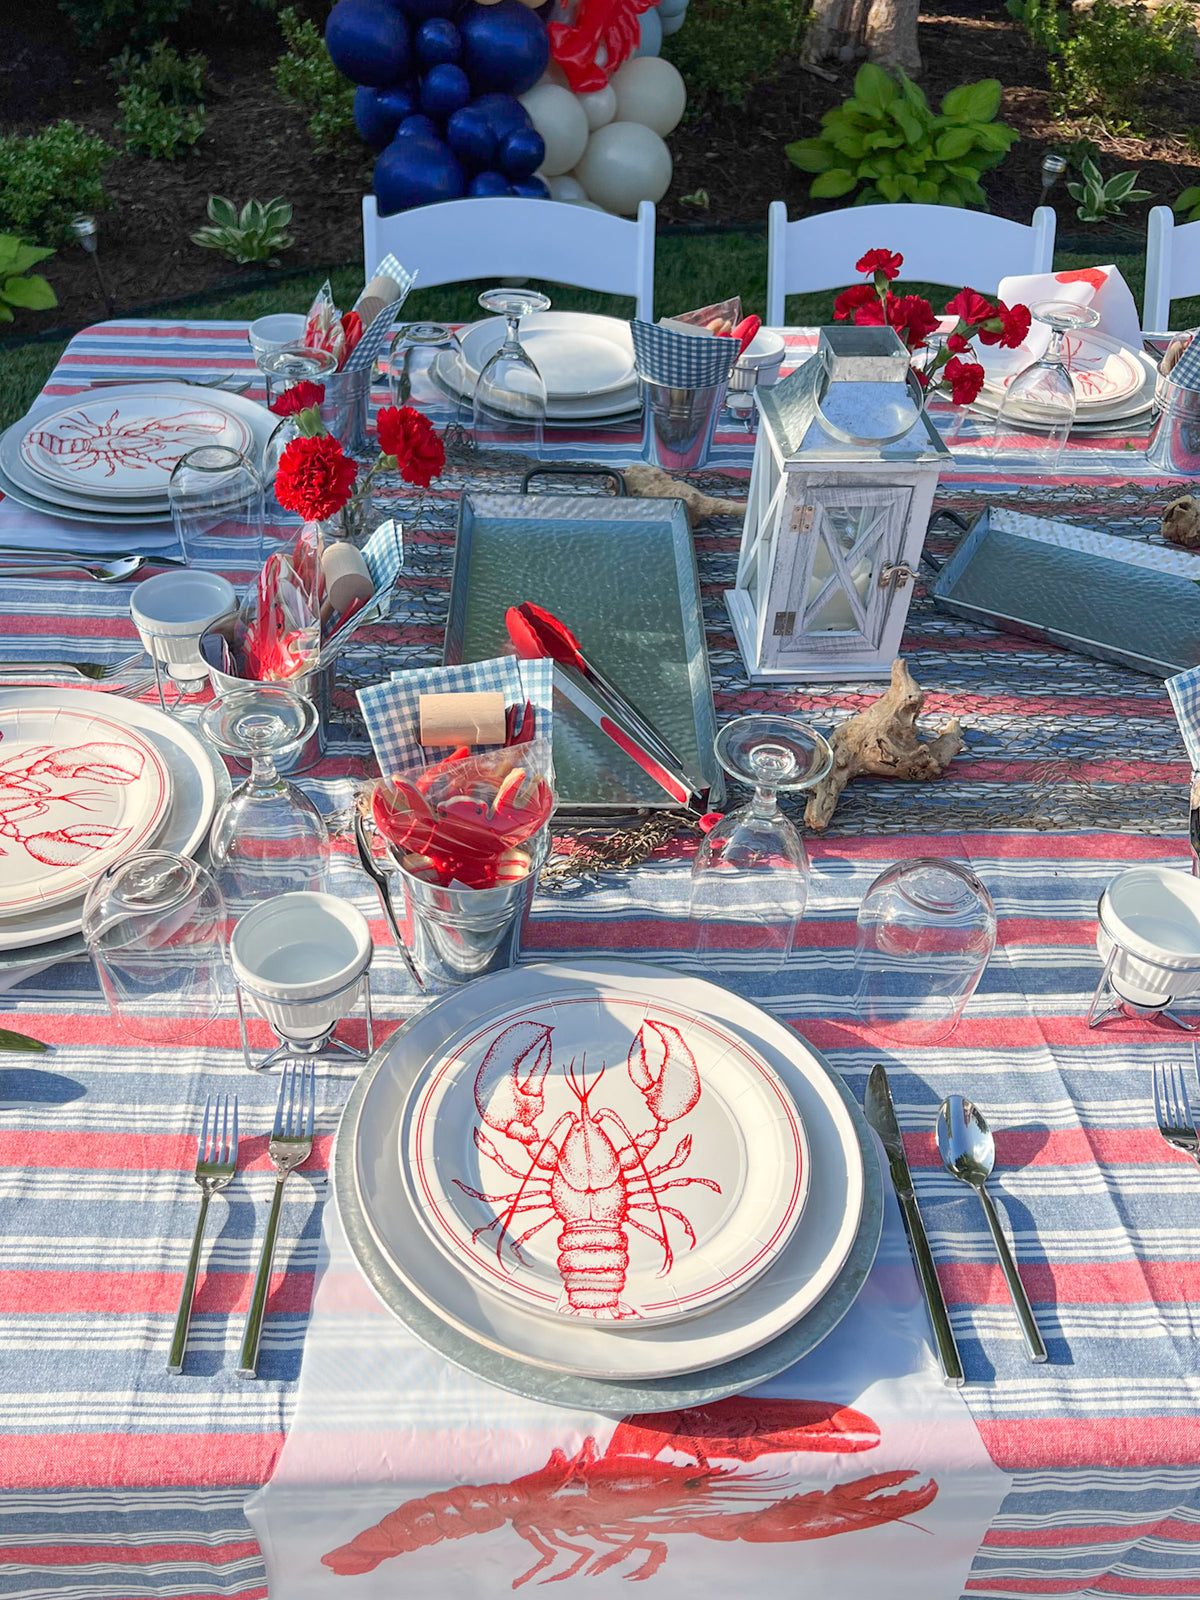  Xigejob Crawfish Boil Plates And Napkins Party Supplies - Lobster  Party Tableware Decorations, Plate, Cup, Napkin, Crayfish Crab Shrimp  Seafood Boil Party Supplies For Birthday Baby Shower